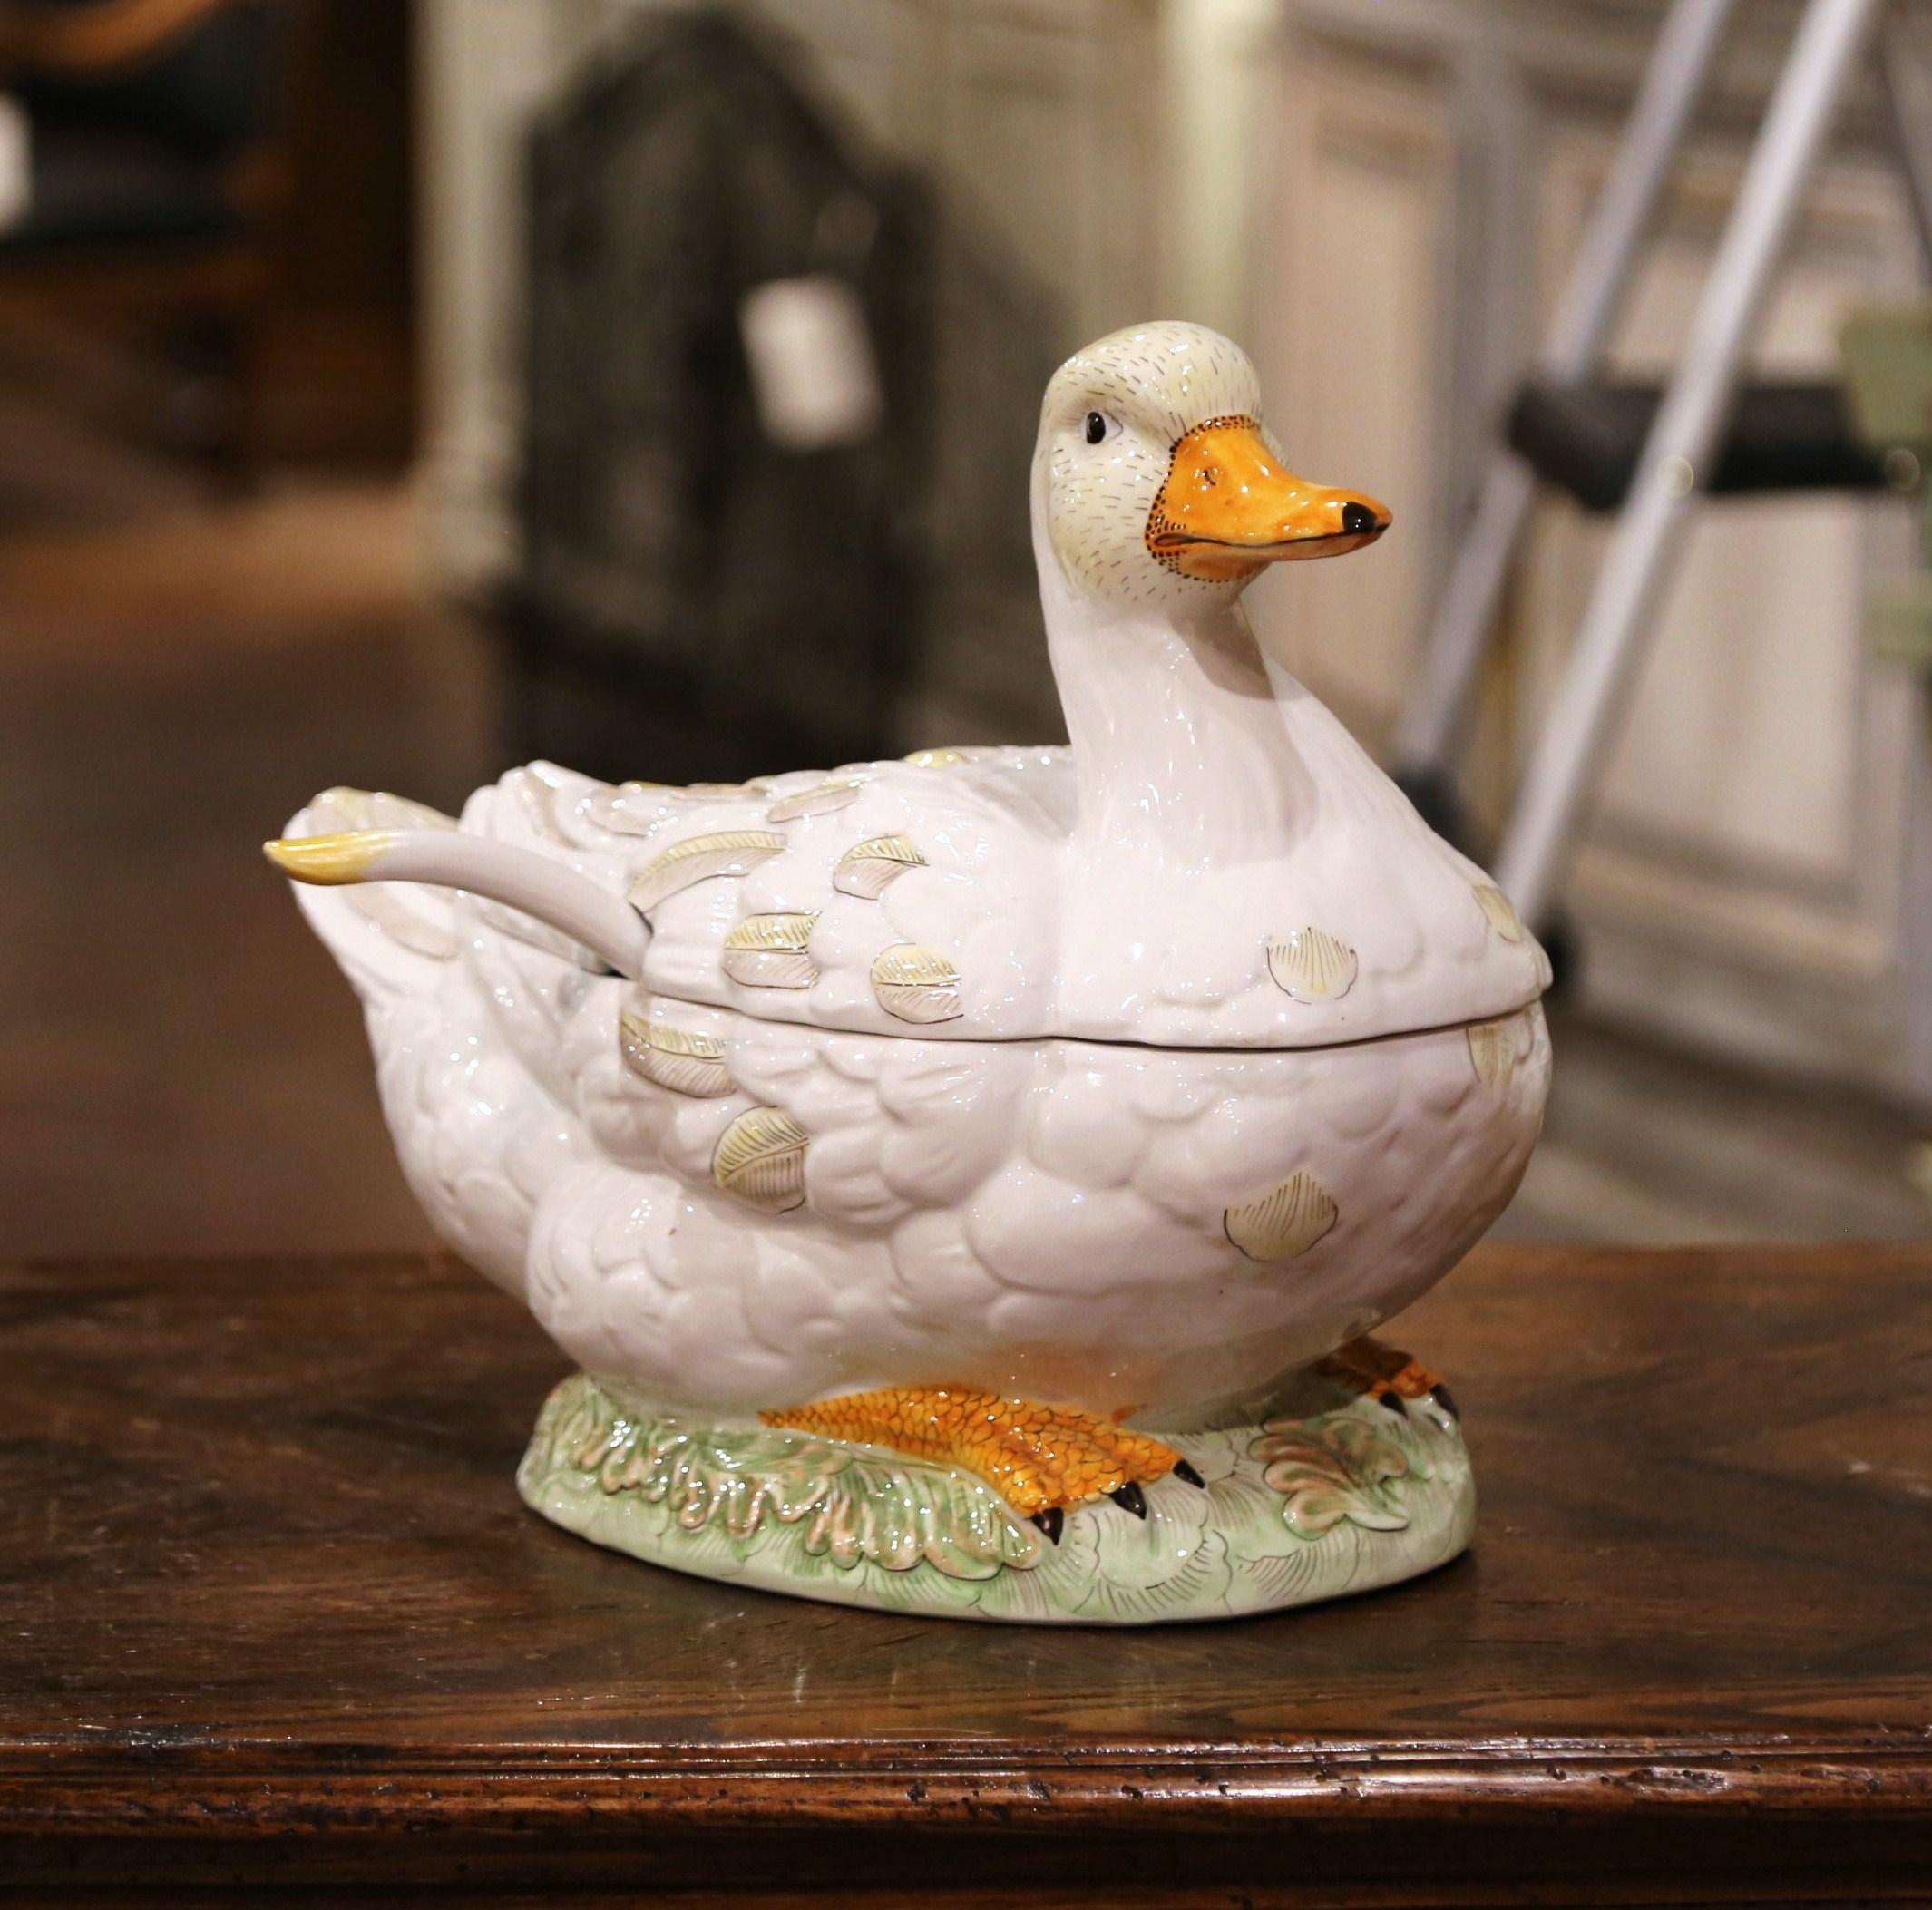 Decorate a dining table with this elegant and colorful Majolica centerpiece. Crafted in France circa 1980, the ceramic tureen is shaped as a duck resting on bed of grass. The lid opens and reveal the inside ladle. The decorative dish is in excellent